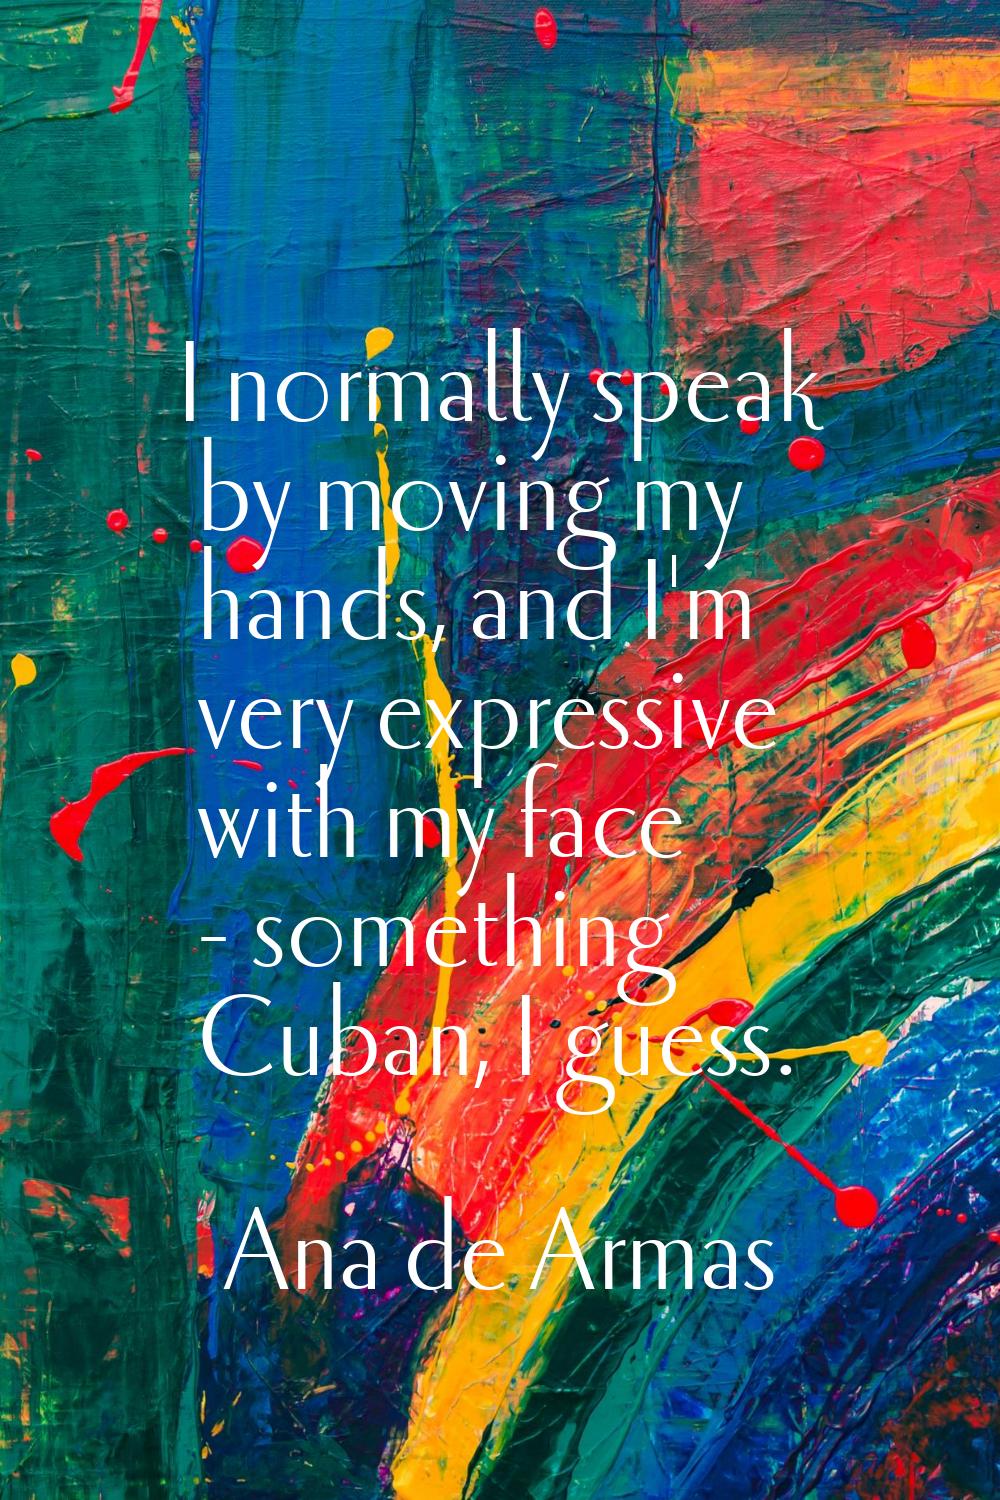 I normally speak by moving my hands, and I'm very expressive with my face - something Cuban, I gues